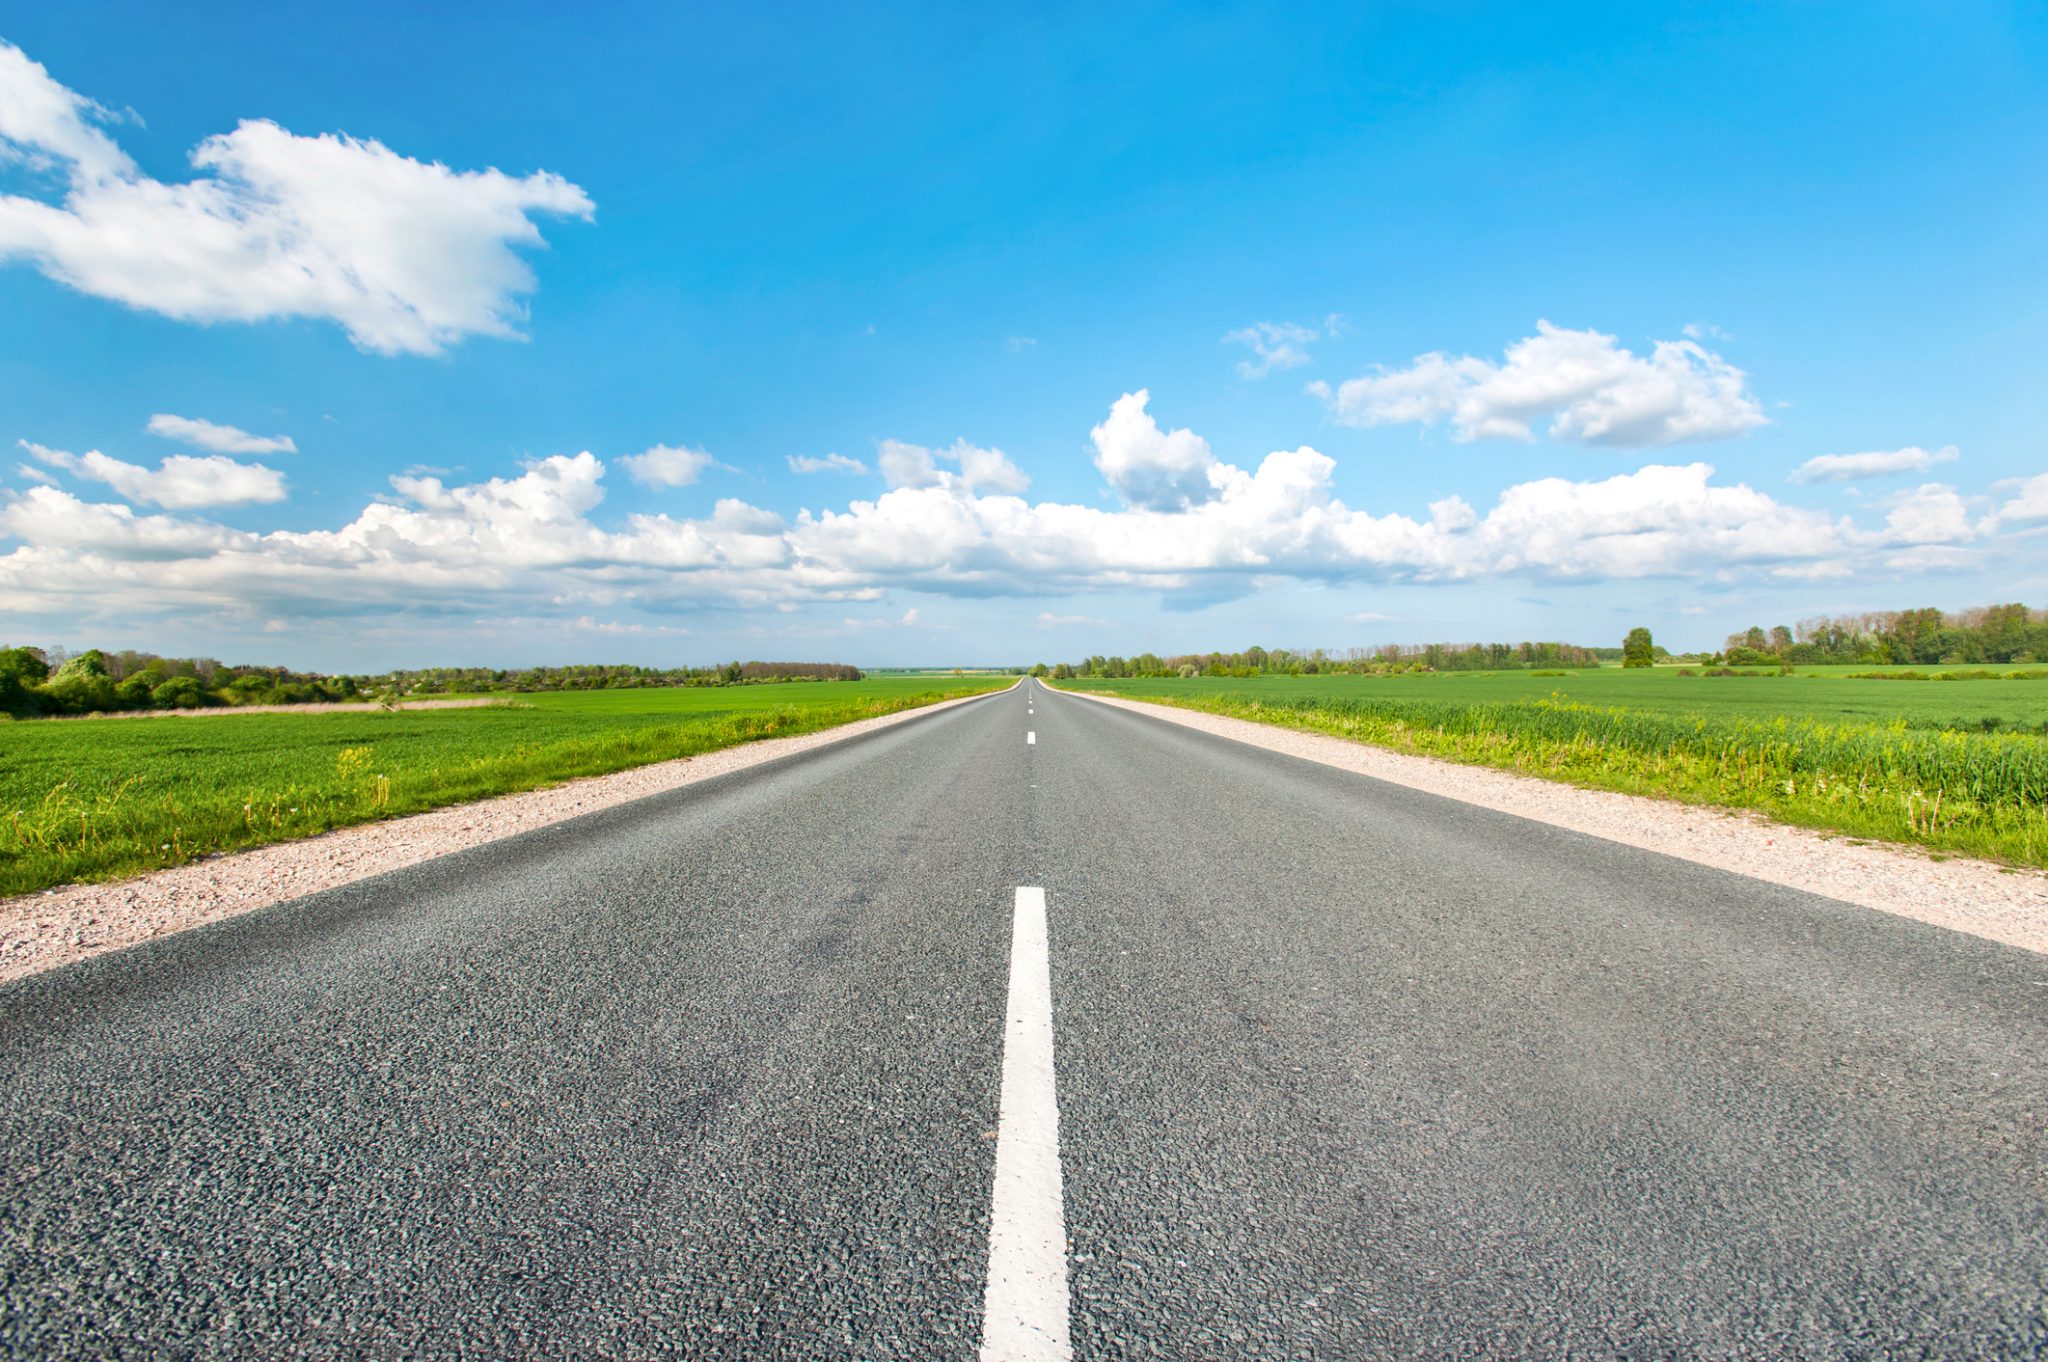 New contract for provincial road design signed